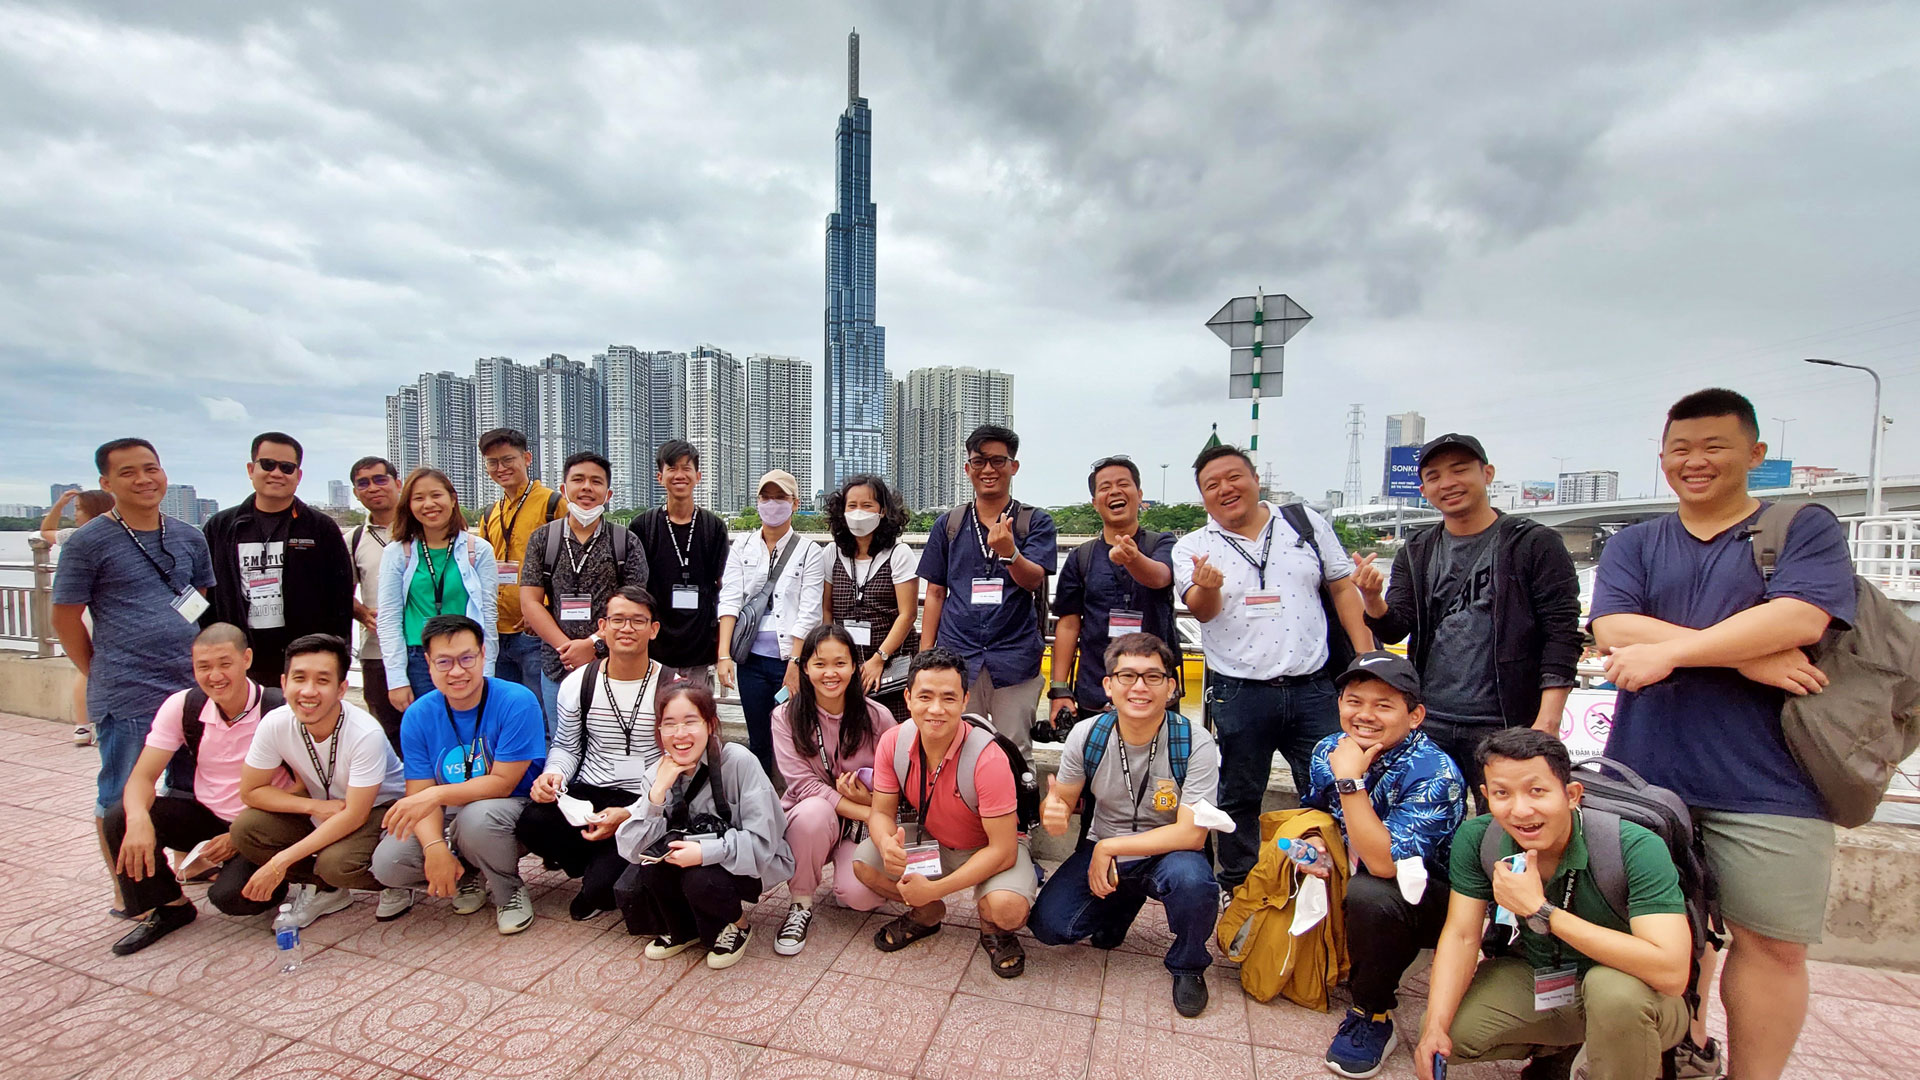 The Mekong-U.S. Partnership Young Scientist Program participants pose in front of the Ho Chi Minh City skyline in Vietnam in 2022.